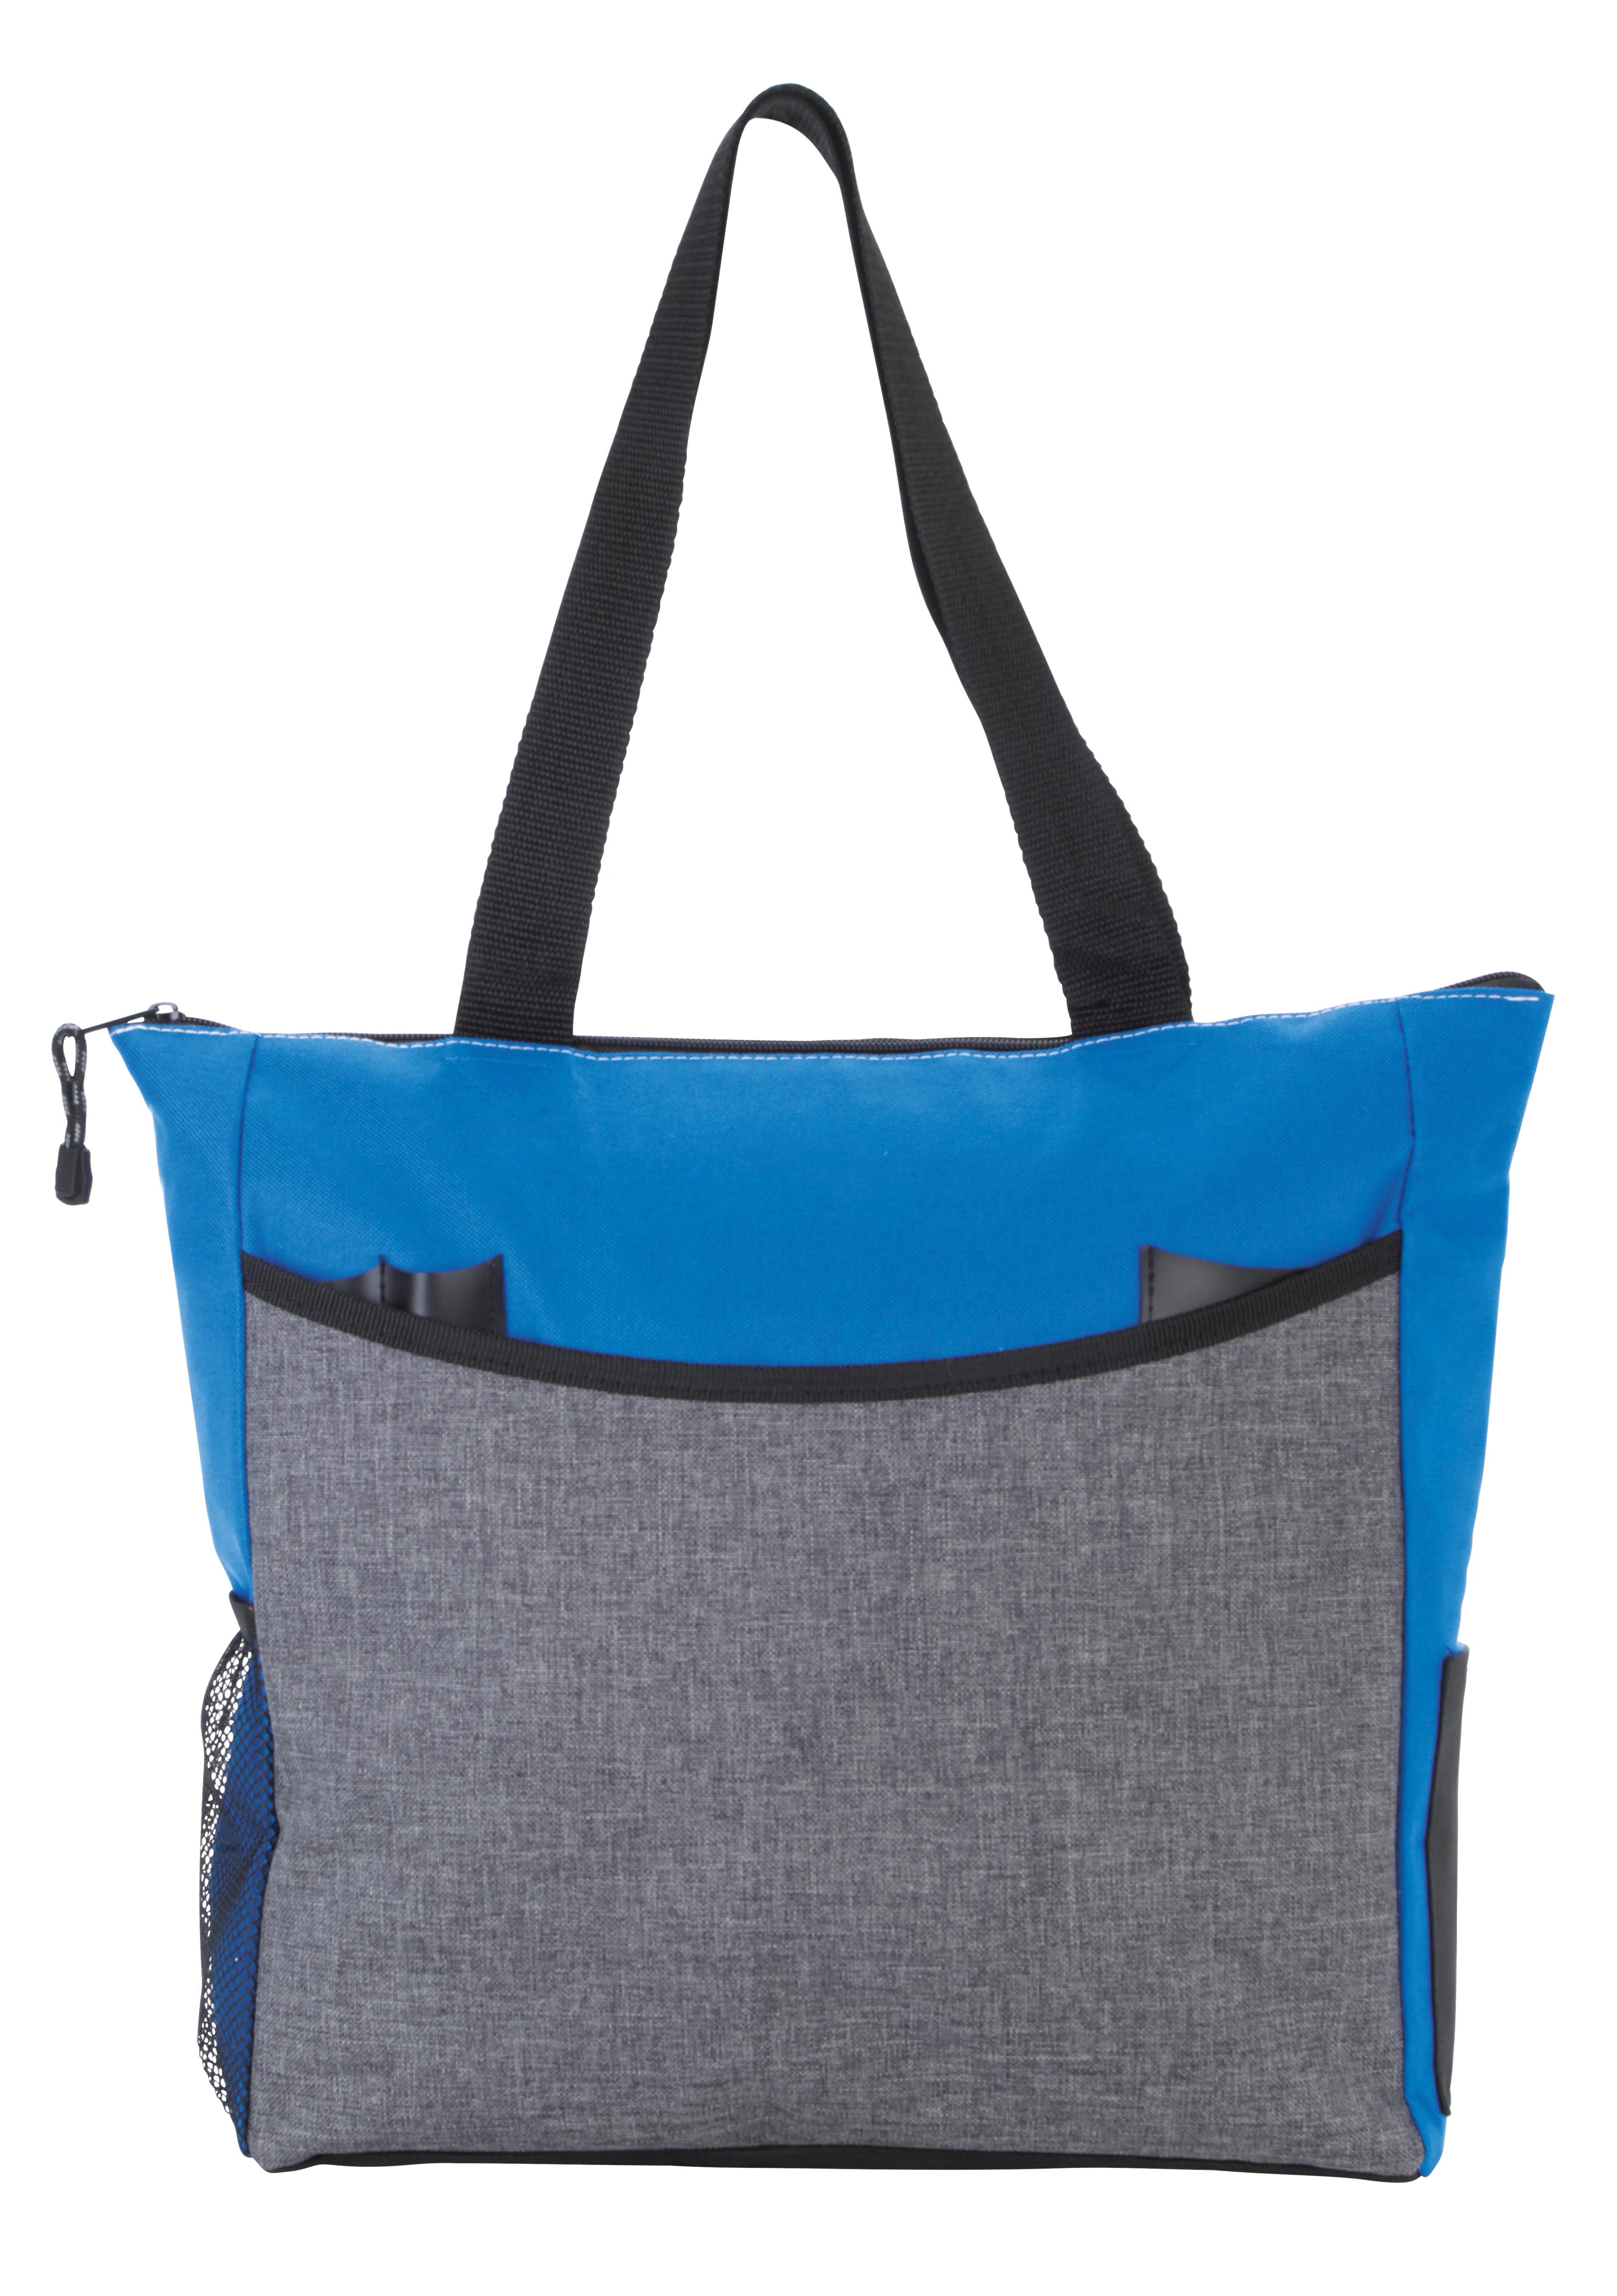 Two-Tone TranSport It Tote 18 of 29